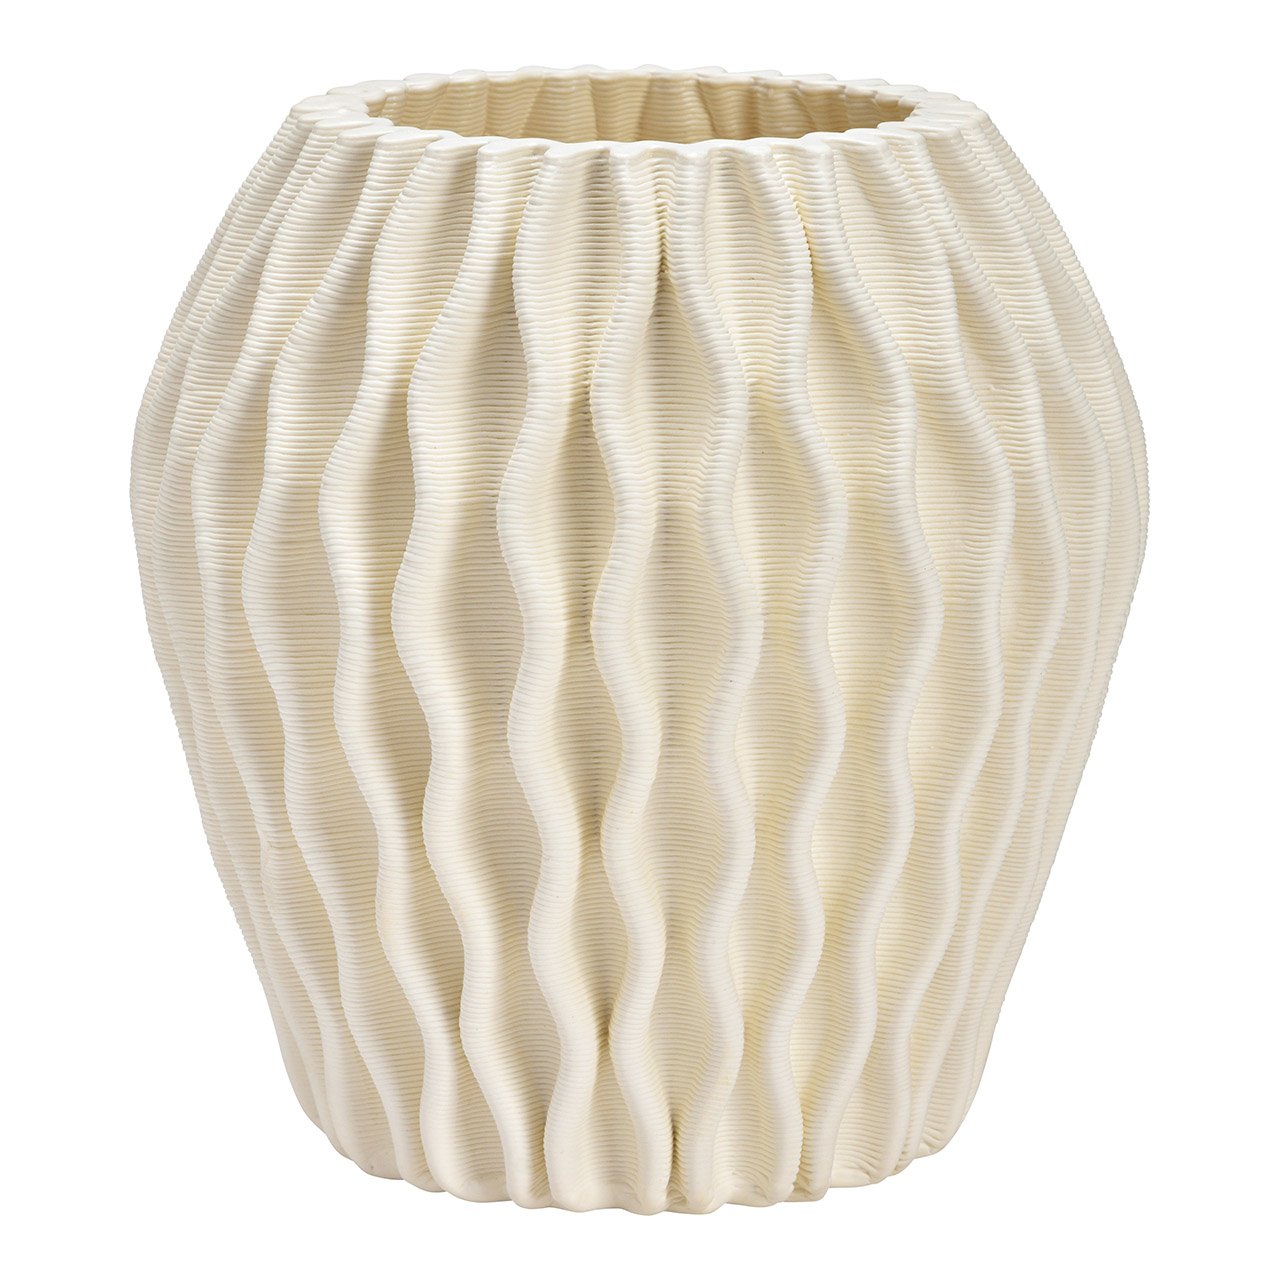 3D printed vase with waves made of porcelain, white (W/H/D) 16x18x16cm